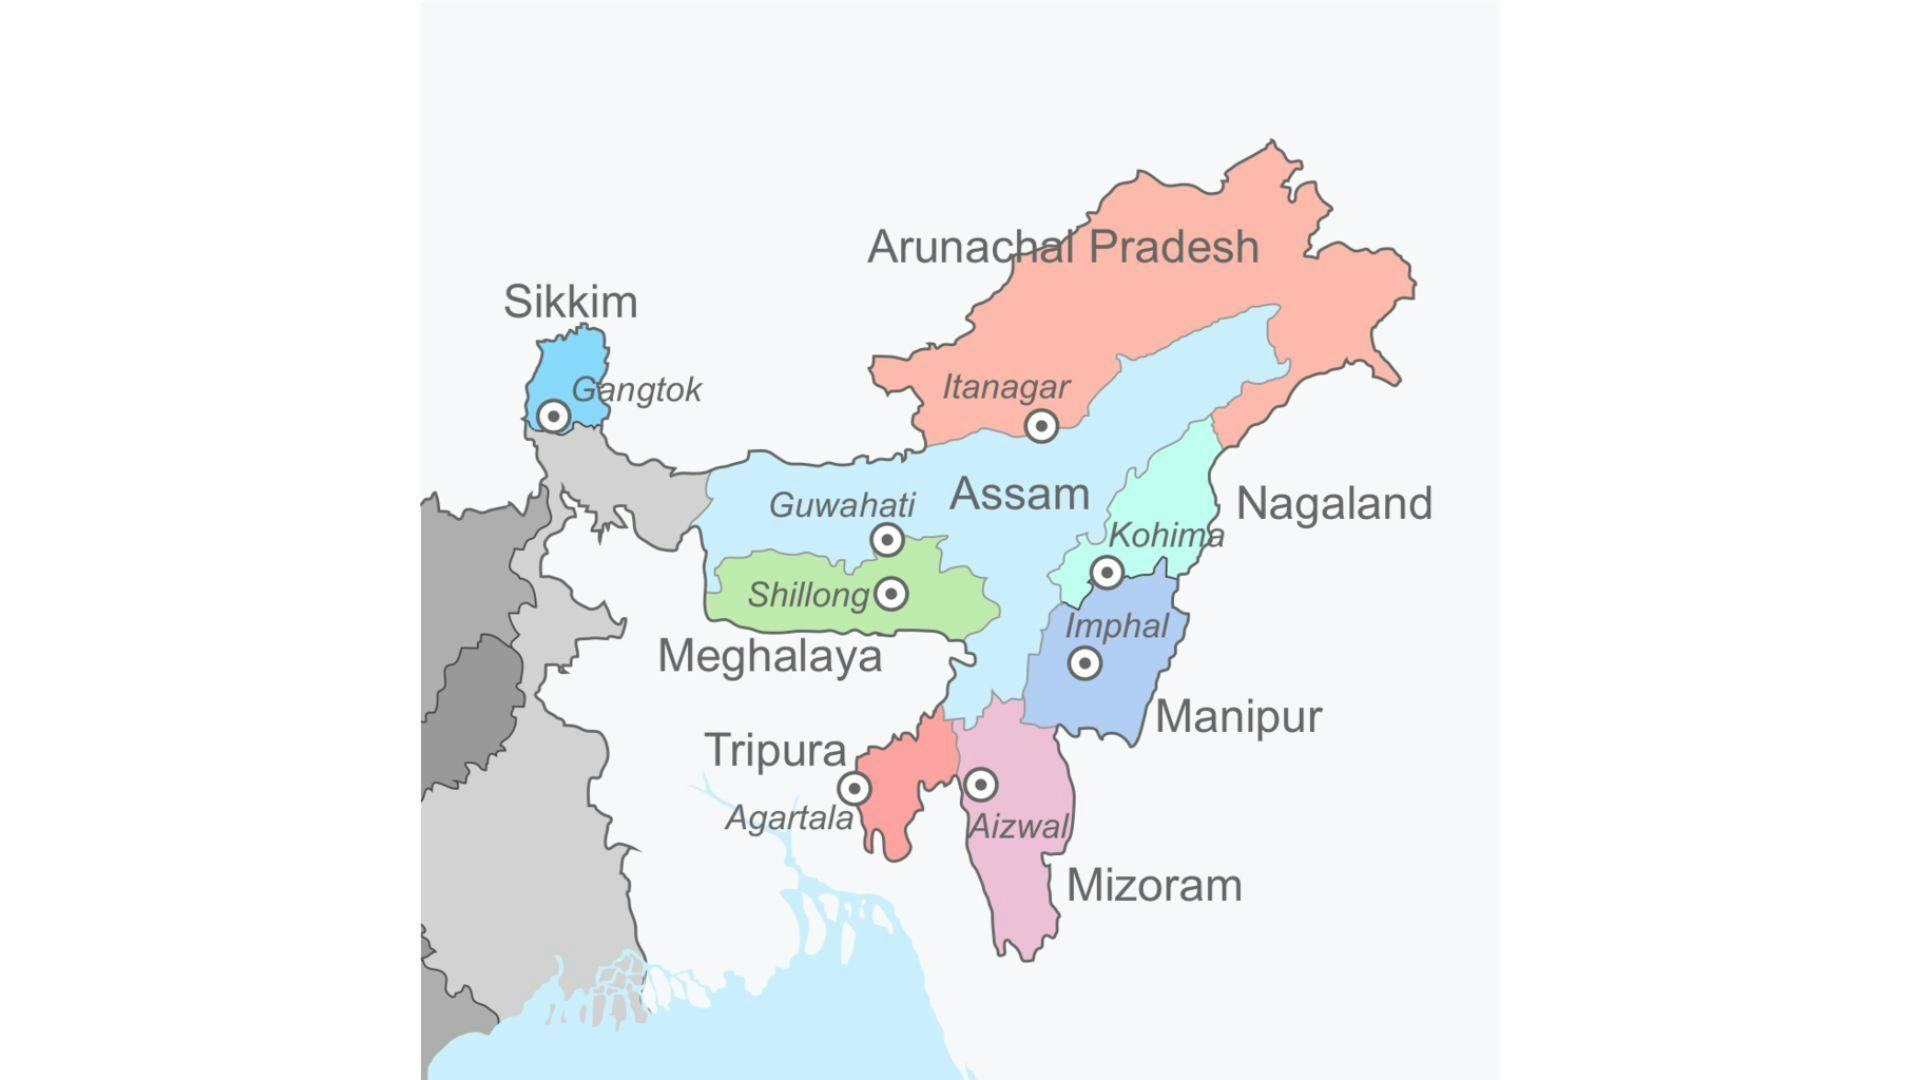 North-East India | Wikimedia Commons